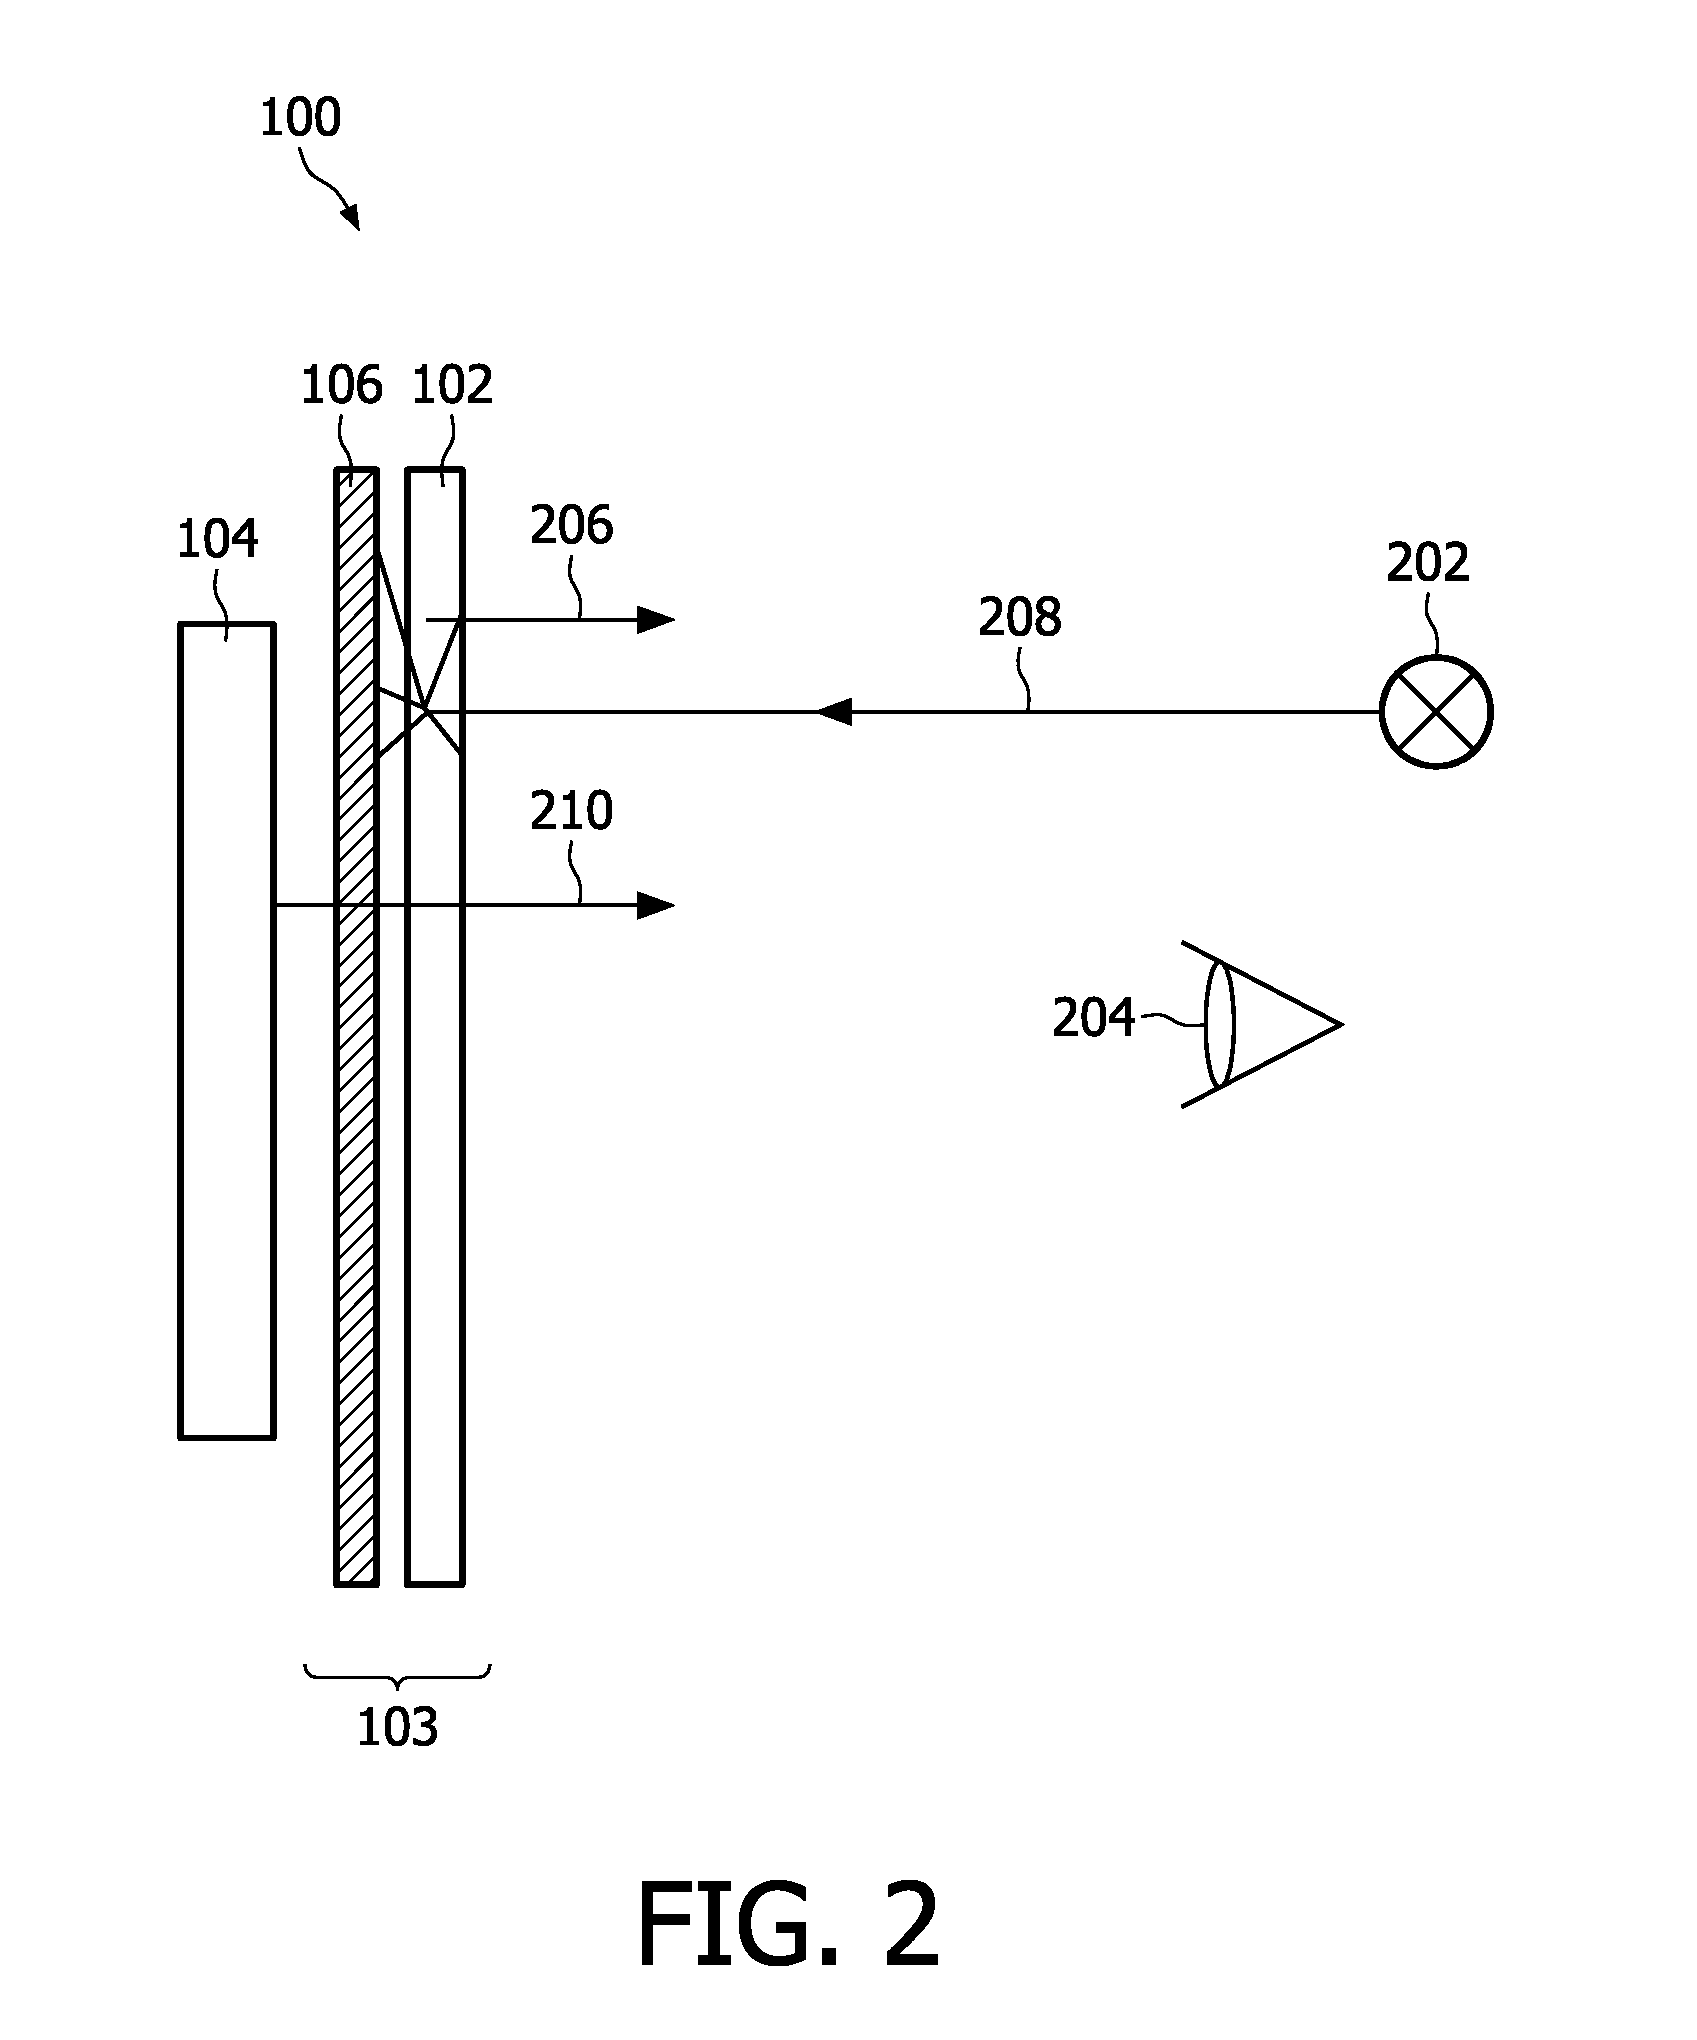 Image display apparatus, and disguising device